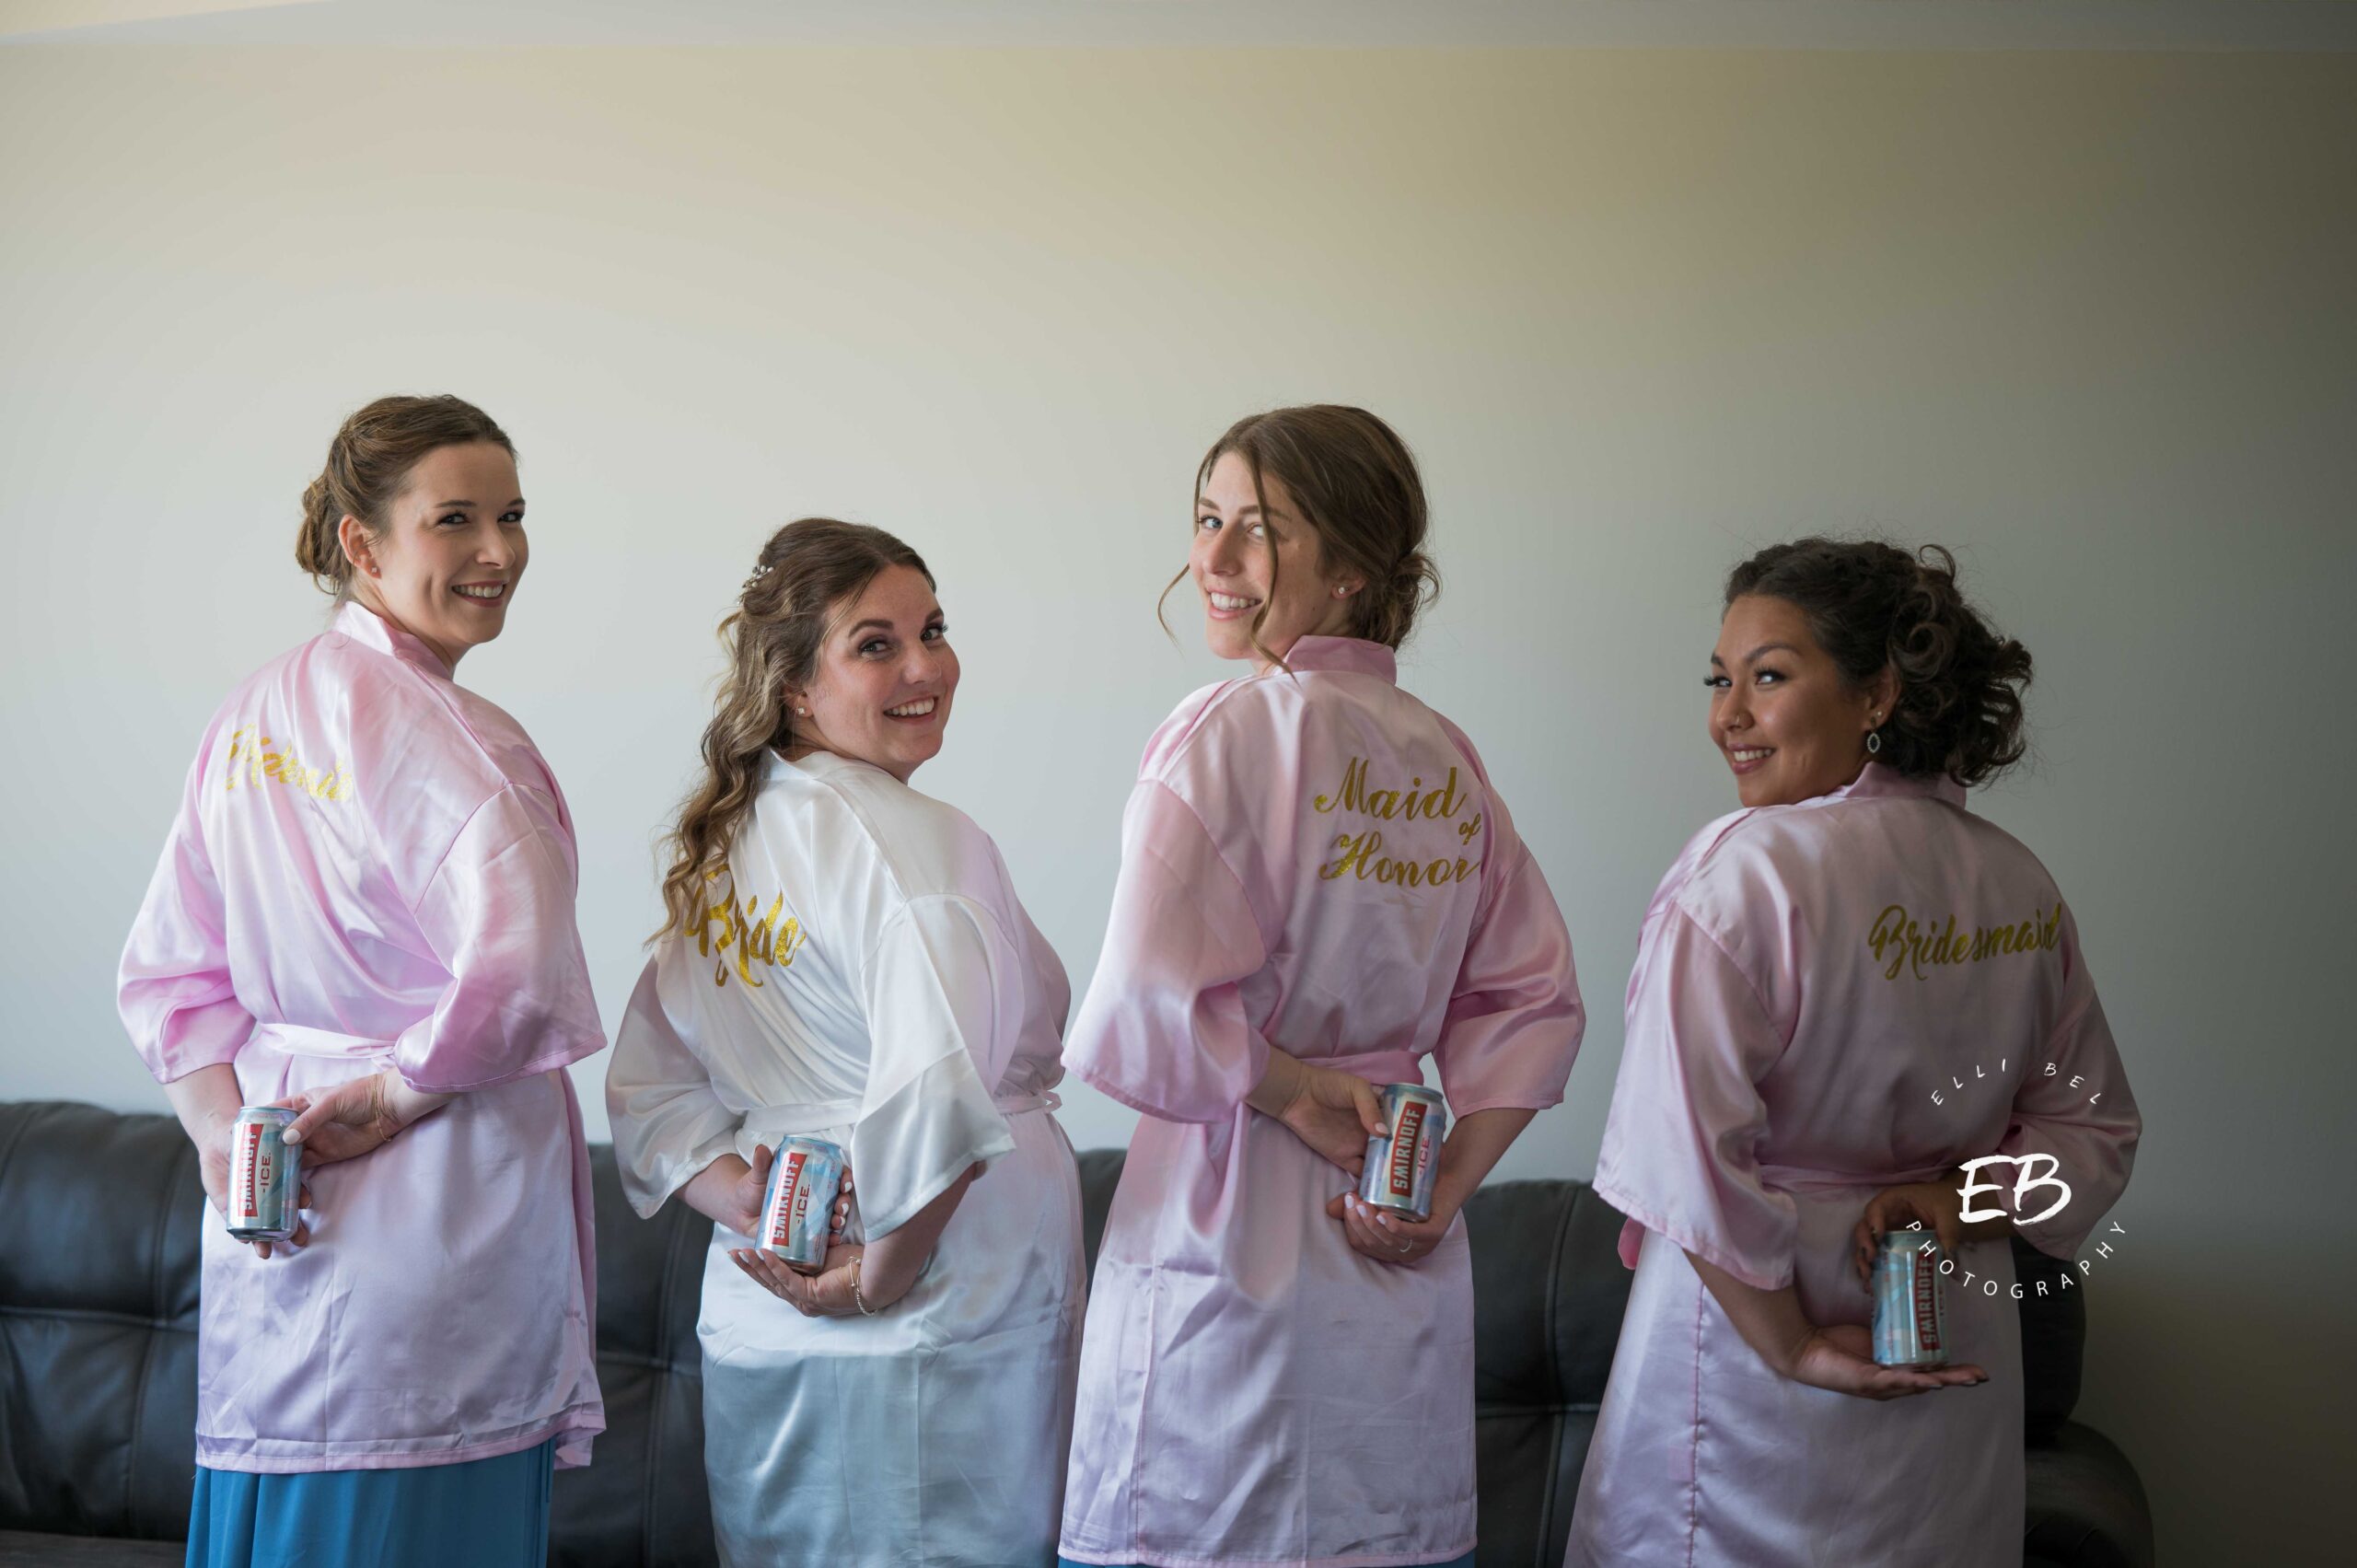 bridesmaids and bride holding beer cans behind their backs, facing the camera